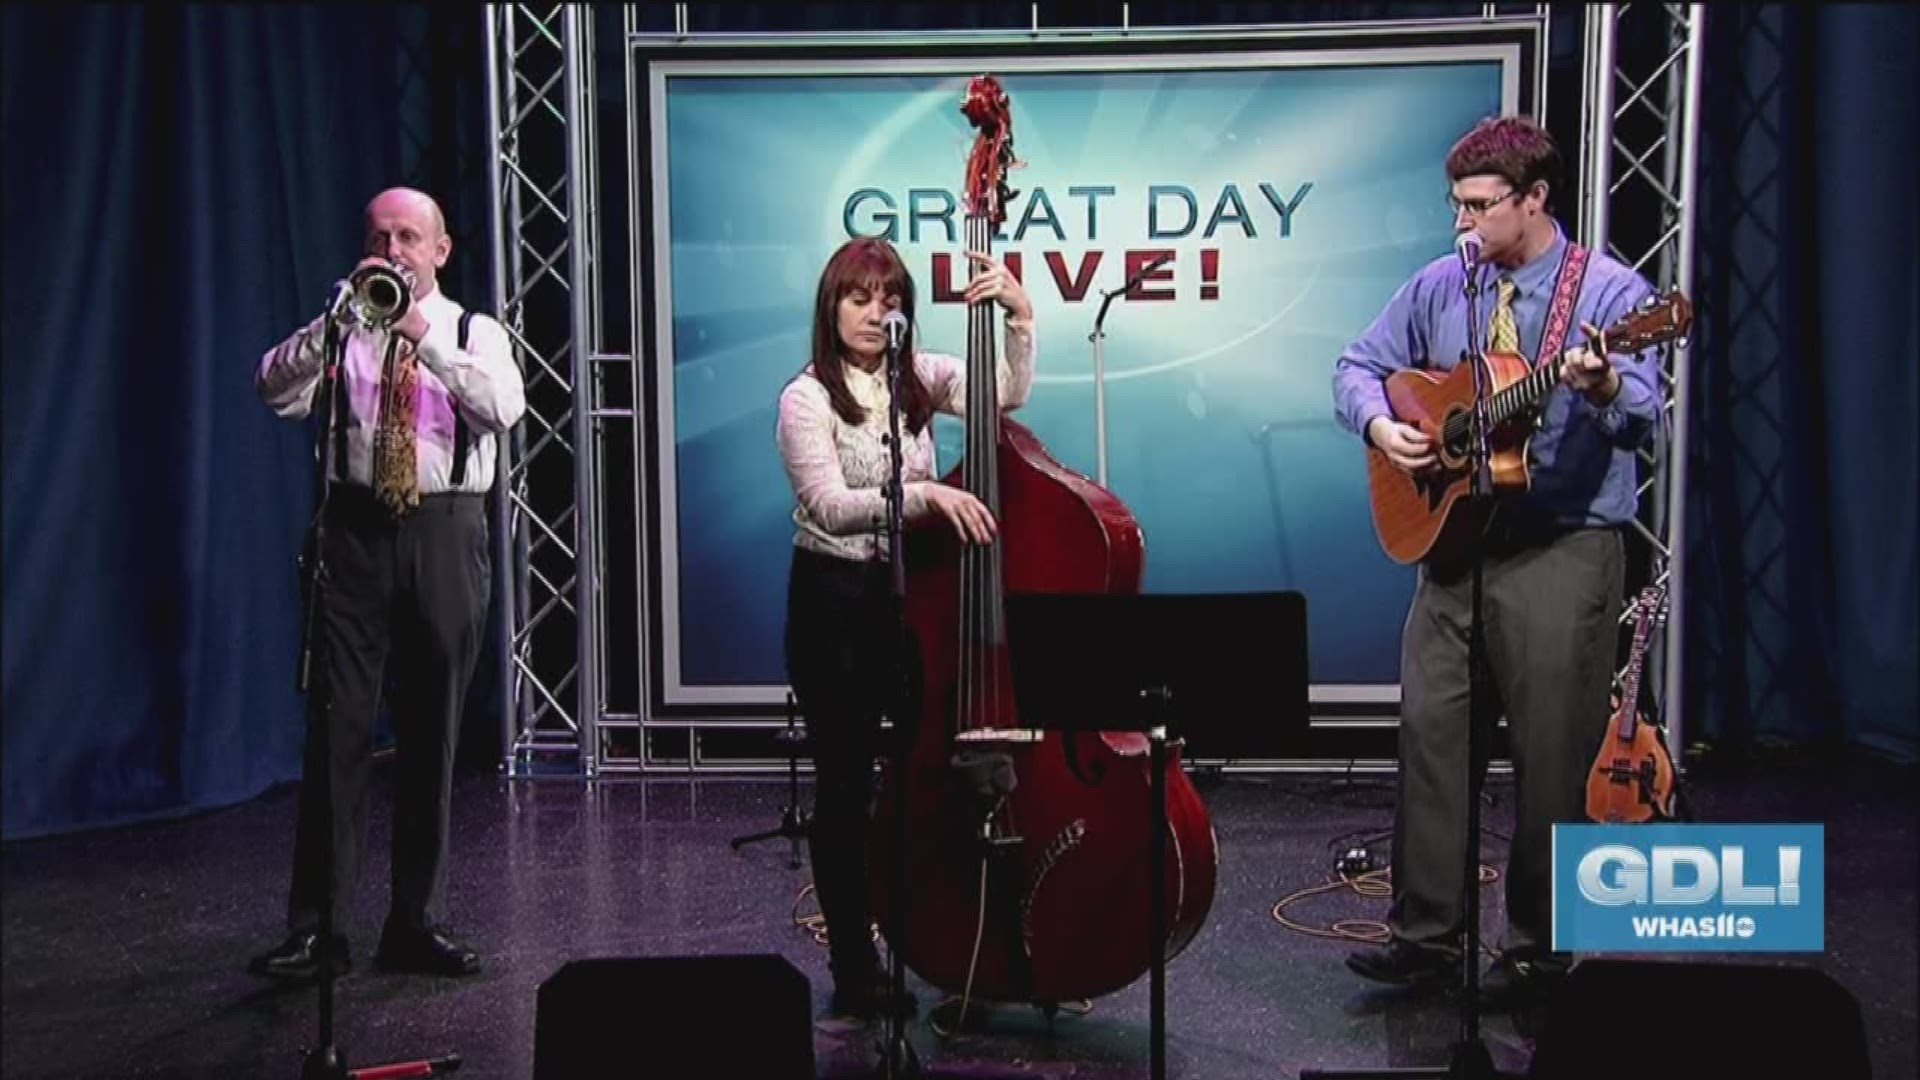 Quite Literally stopped by Great Day Live to perform a couple songs. You can follow them on Facebook and Instagram at @QuiteLiterallyBand.